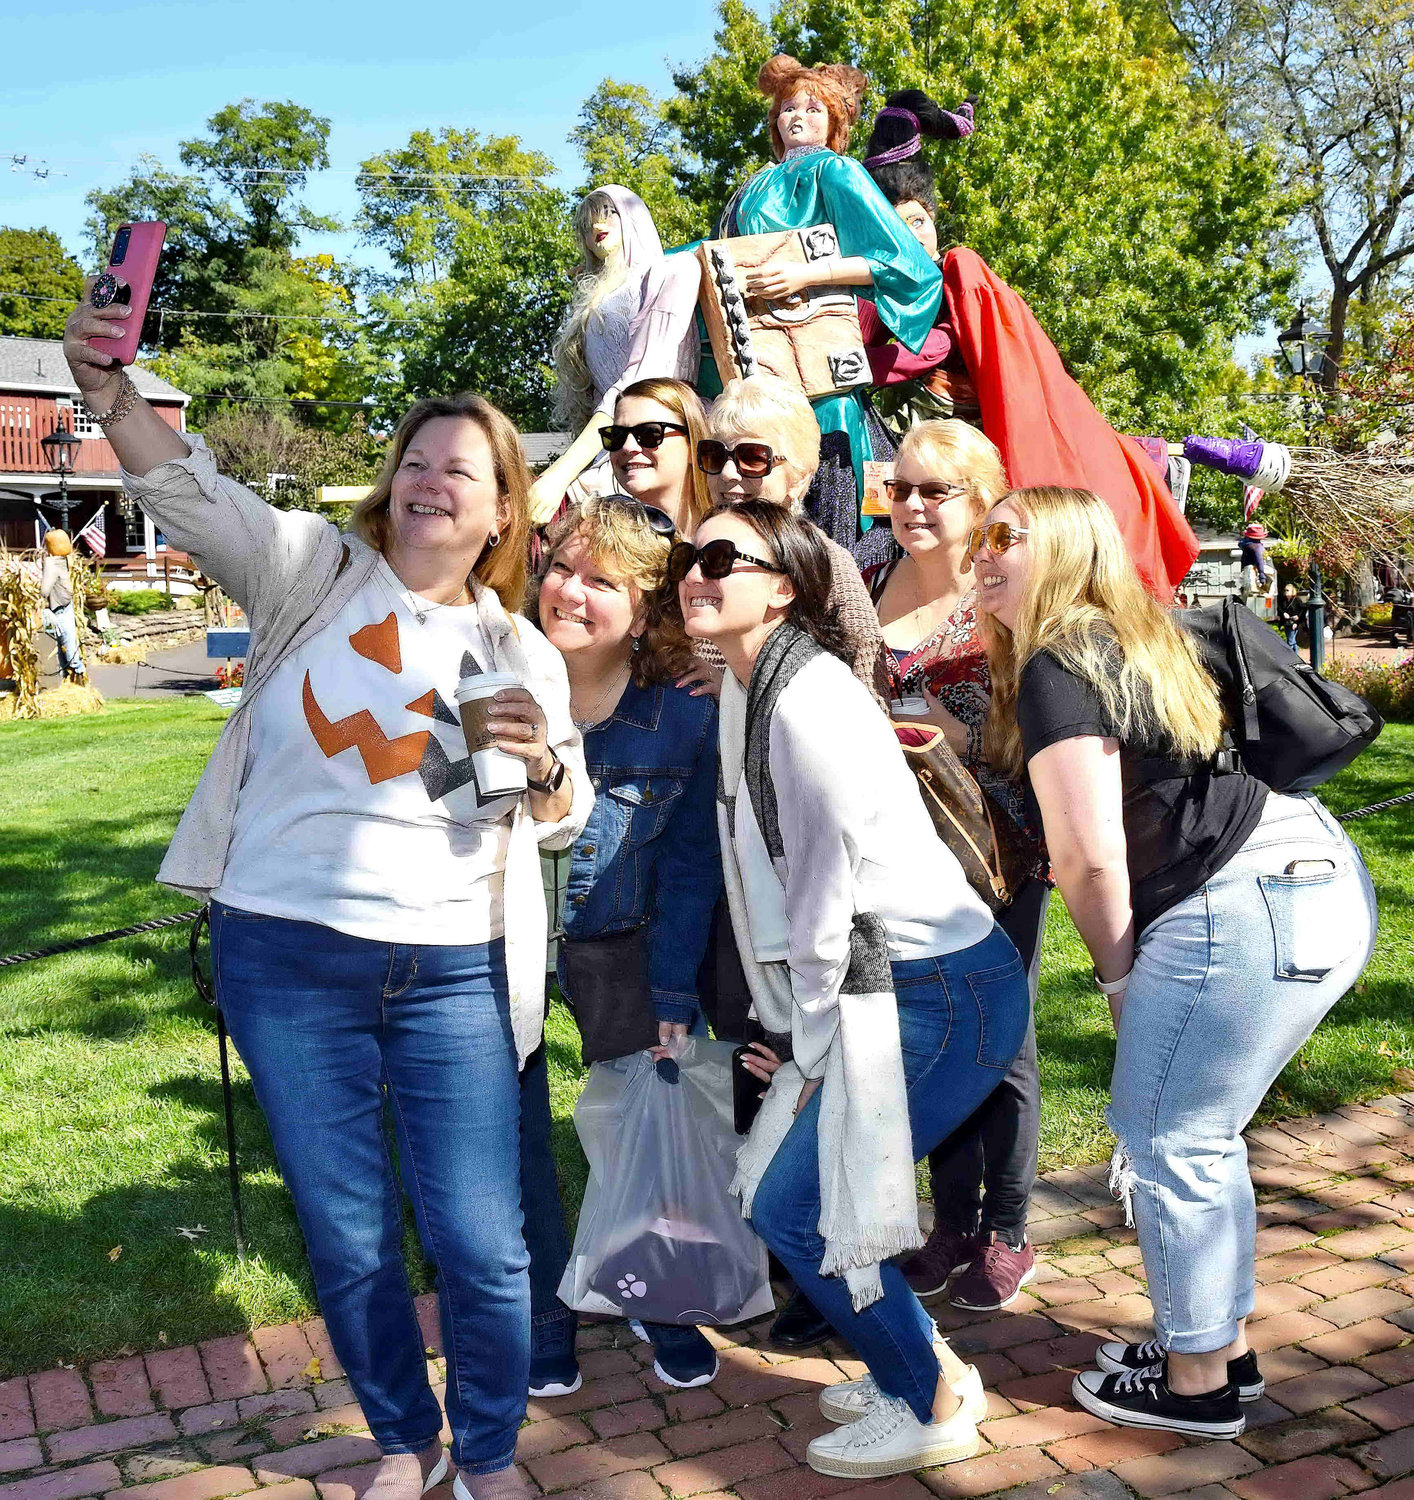 Visitors take a selfie in front of “The Witch Is Back” at the Peddler’s Village annual scarecrow display around the grounds of the shopping mecca. More than a hundred scarecrows created by local residents are on display through Oct. 31.